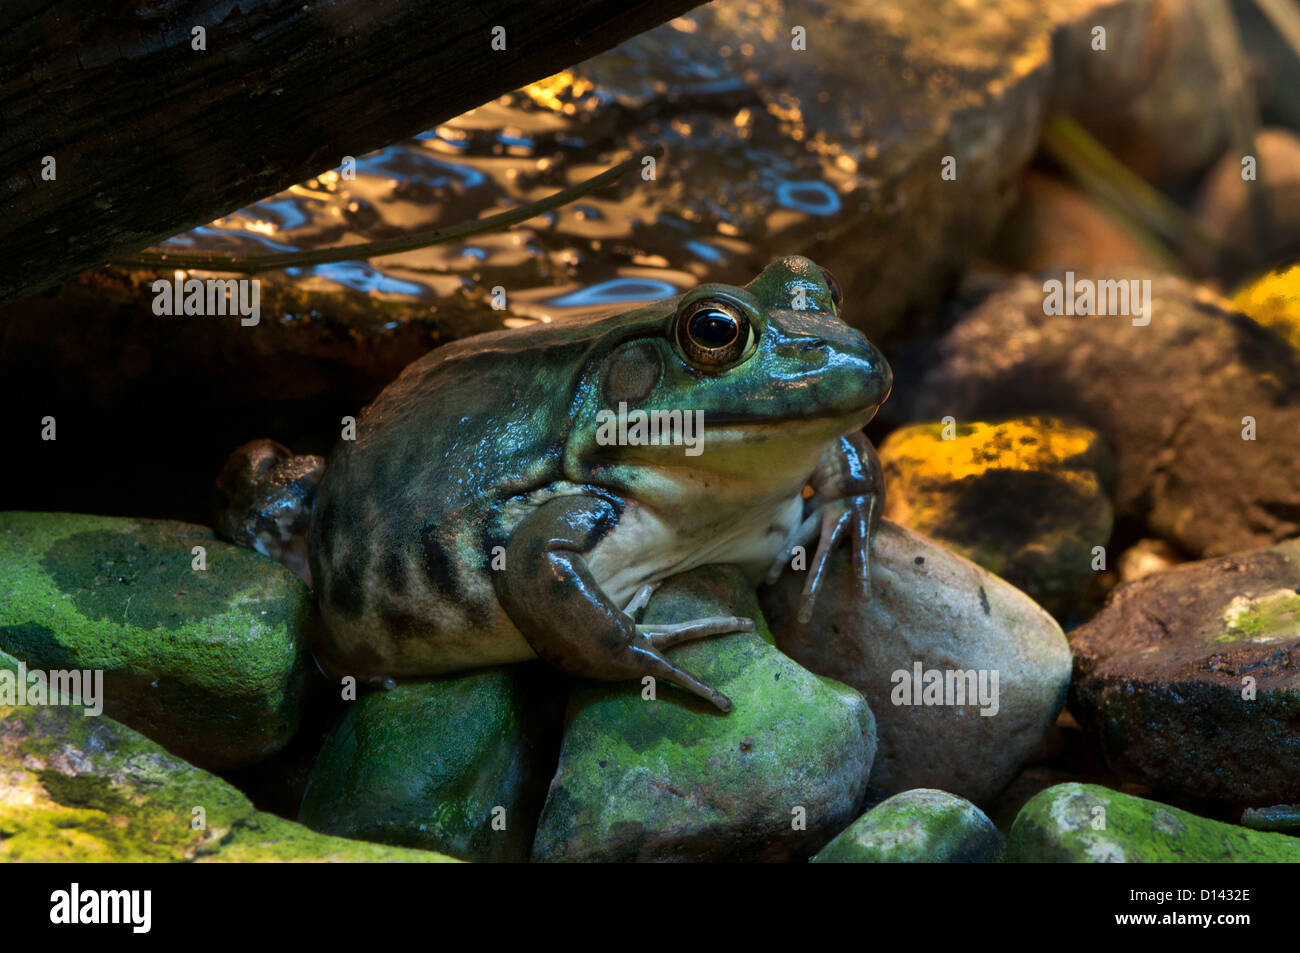 A Green Frog. Stock Photo